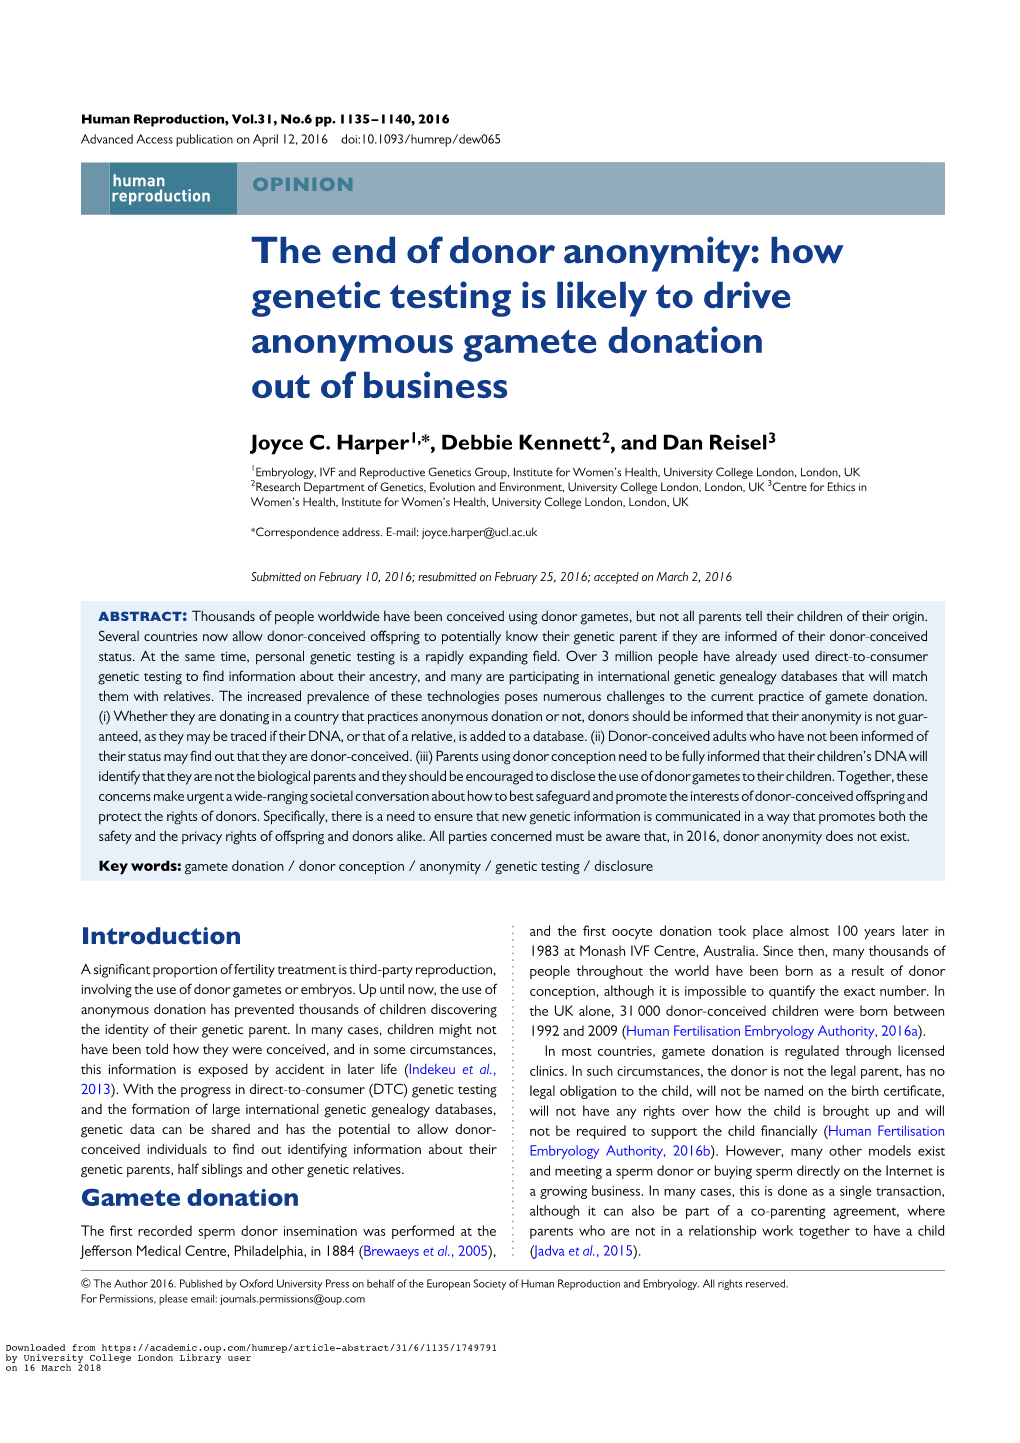 How Genetic Testing Is Likely to Drive Anonymous Gamete Donation out of Business